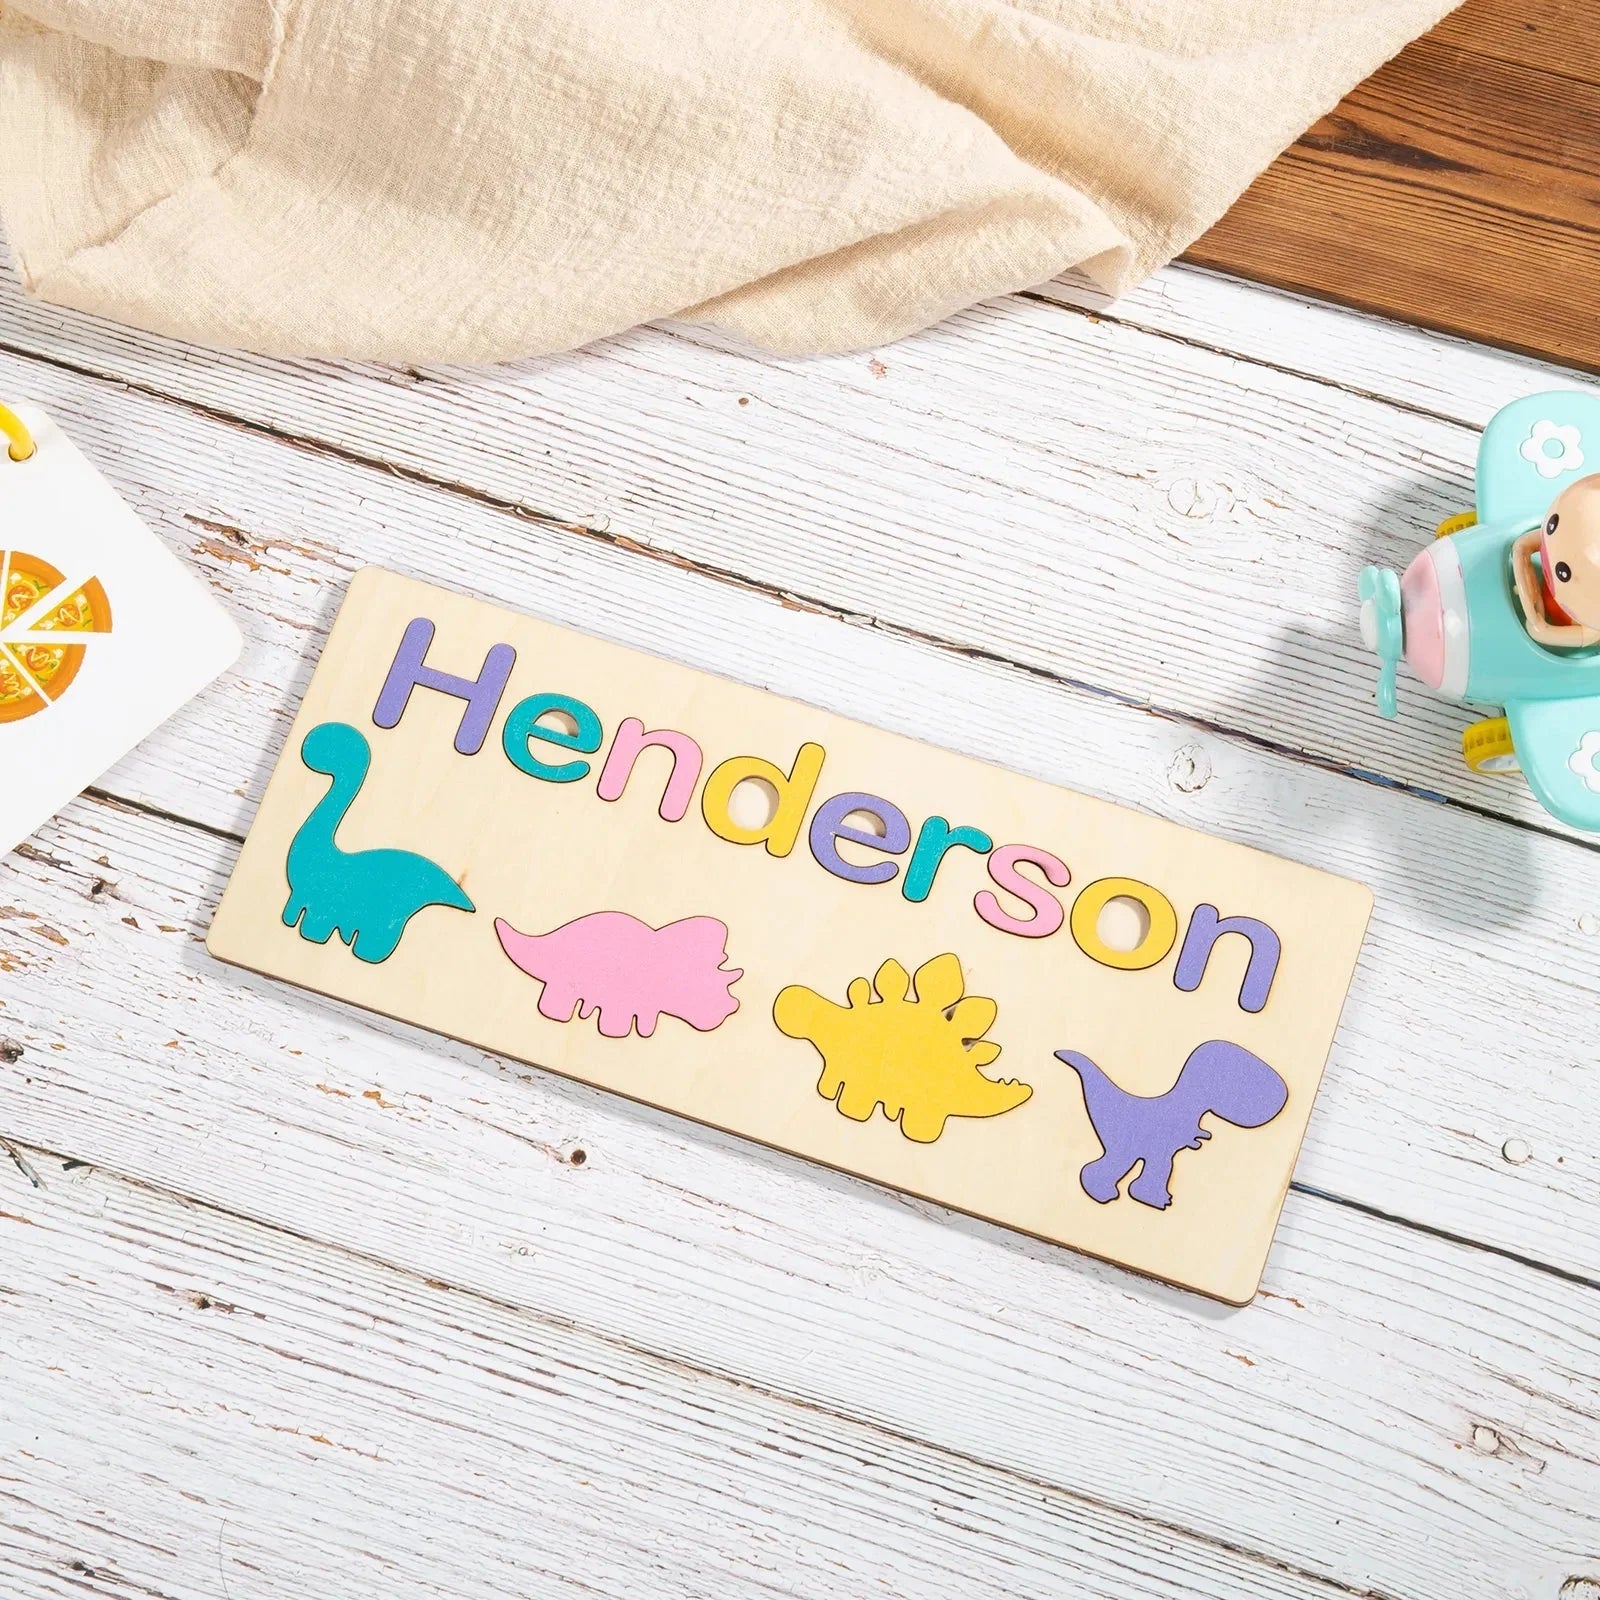 Personalised Name Puzzle 2 Baby Toys & Activity Equipment Storkke 